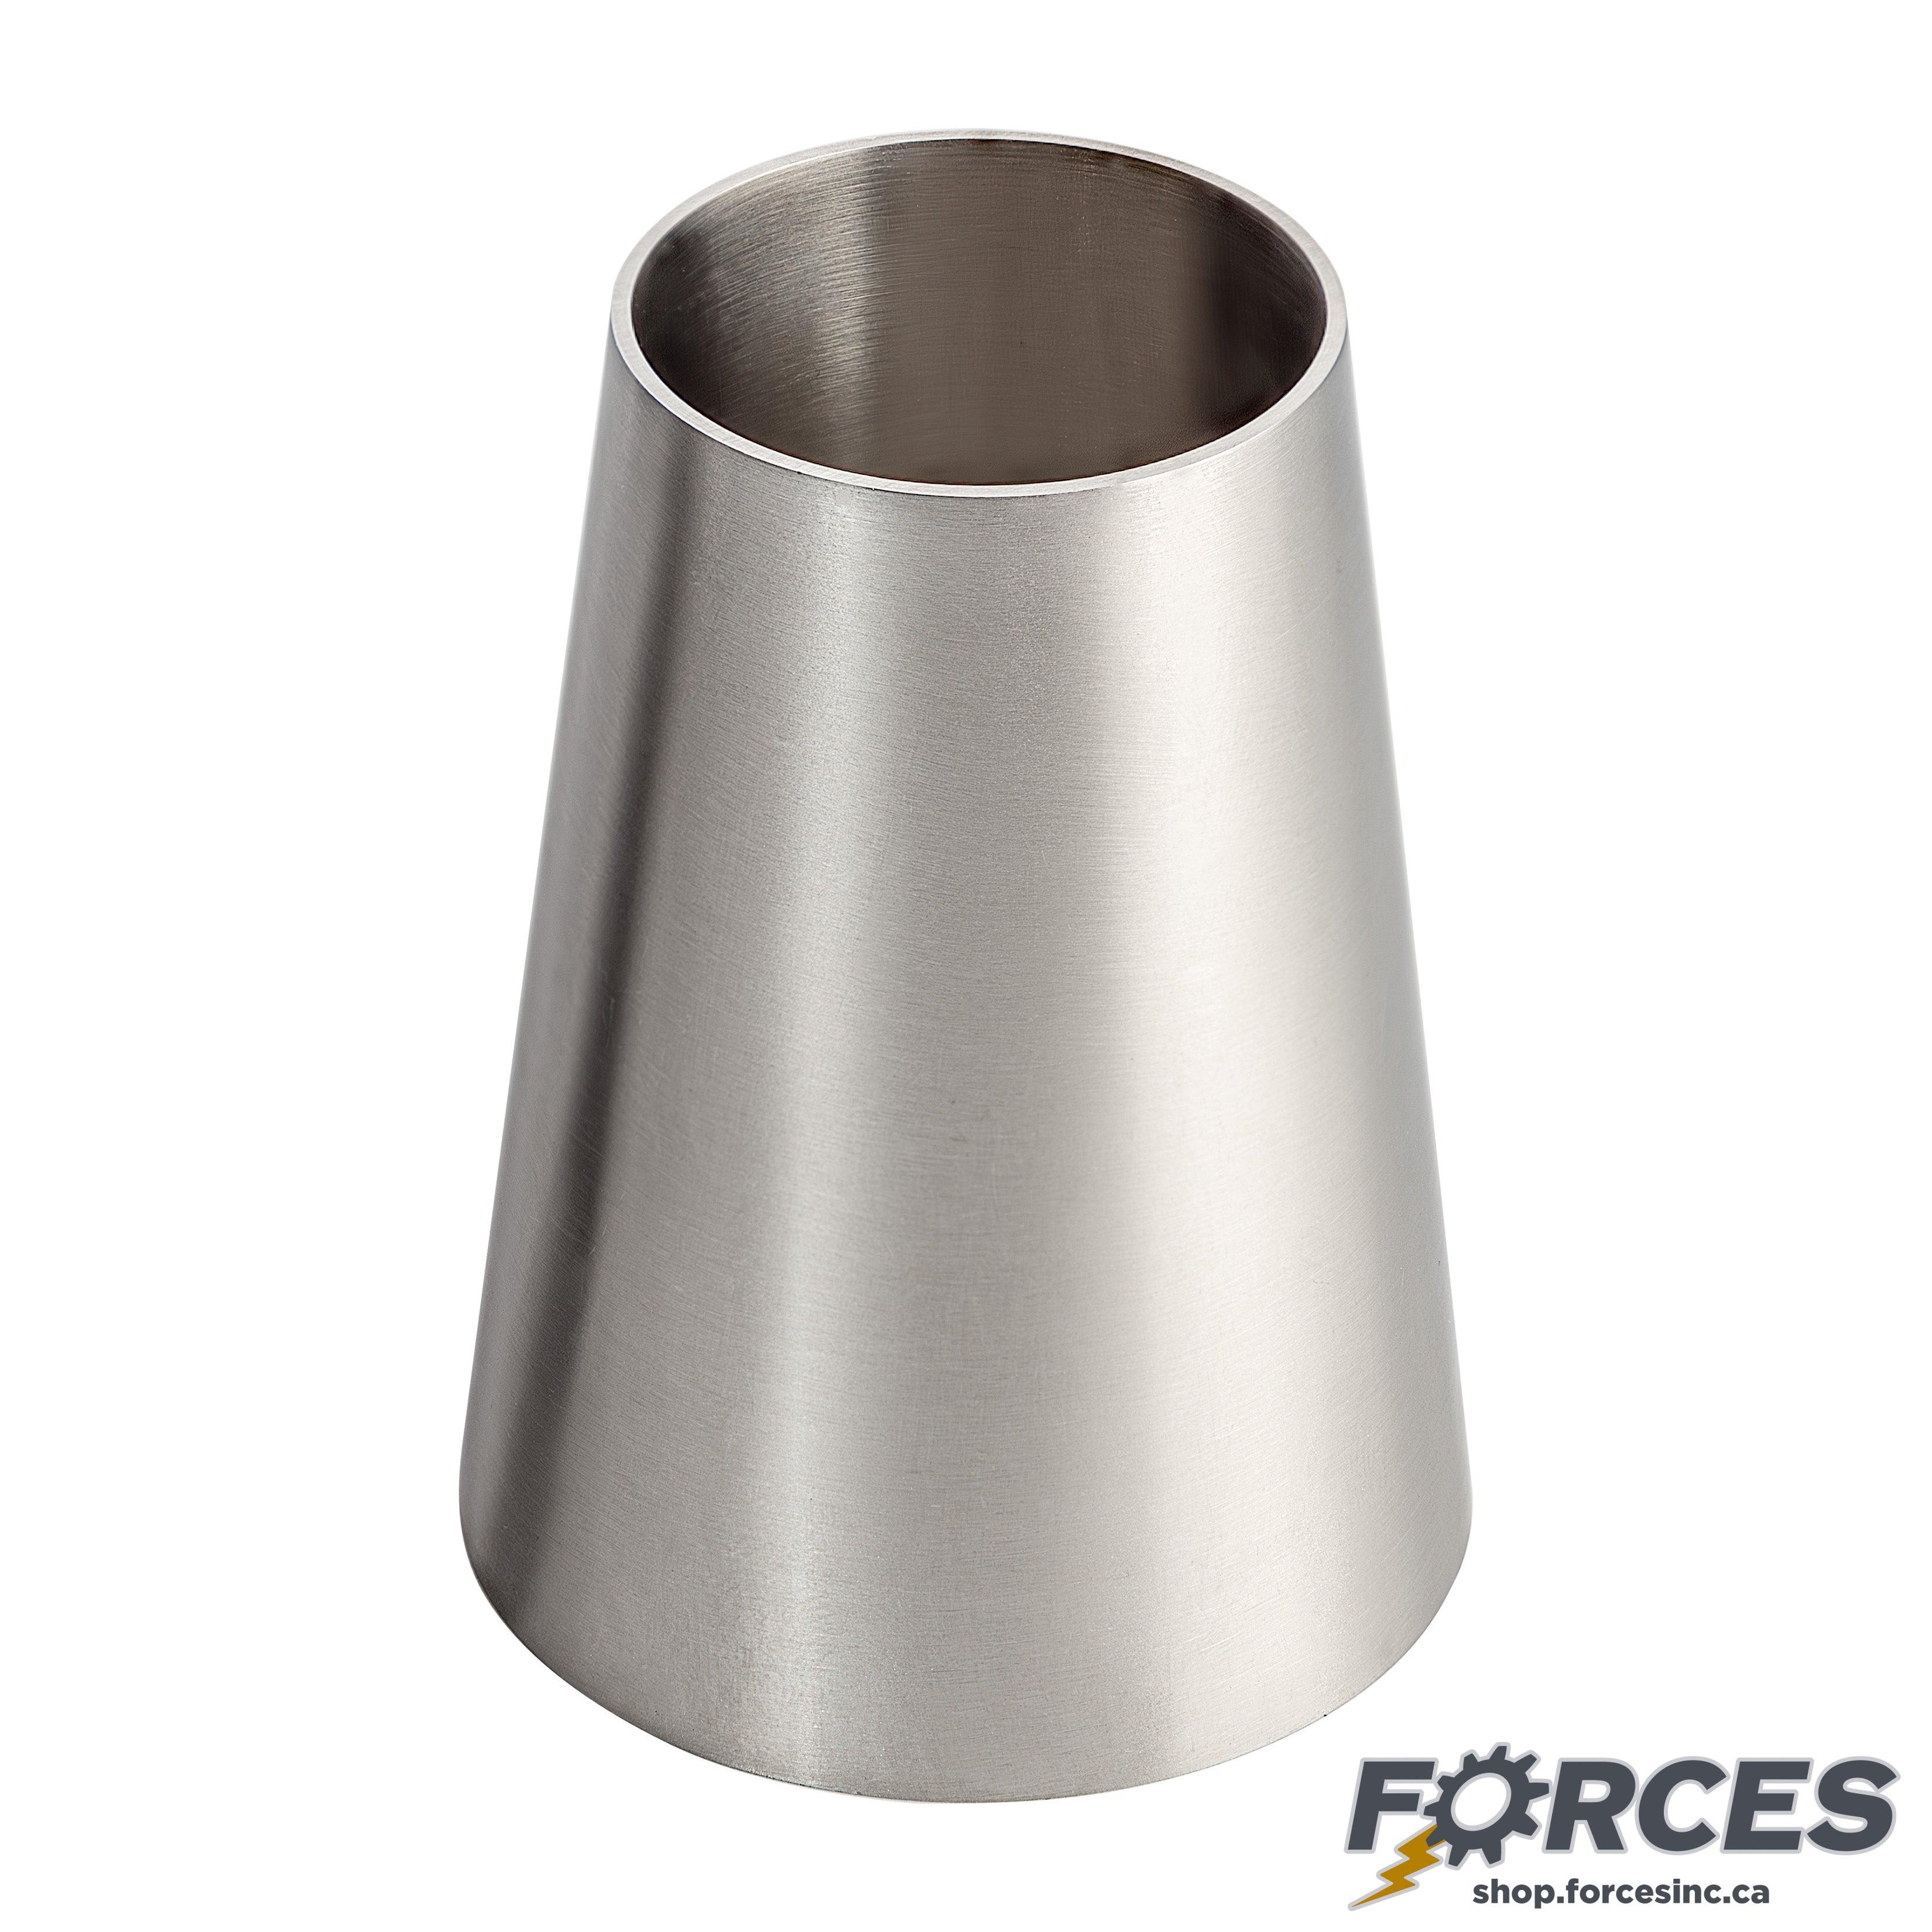 6" x 4" Butt Weld Concentric Reducer - Stainless Steel 316 - Forces Inc